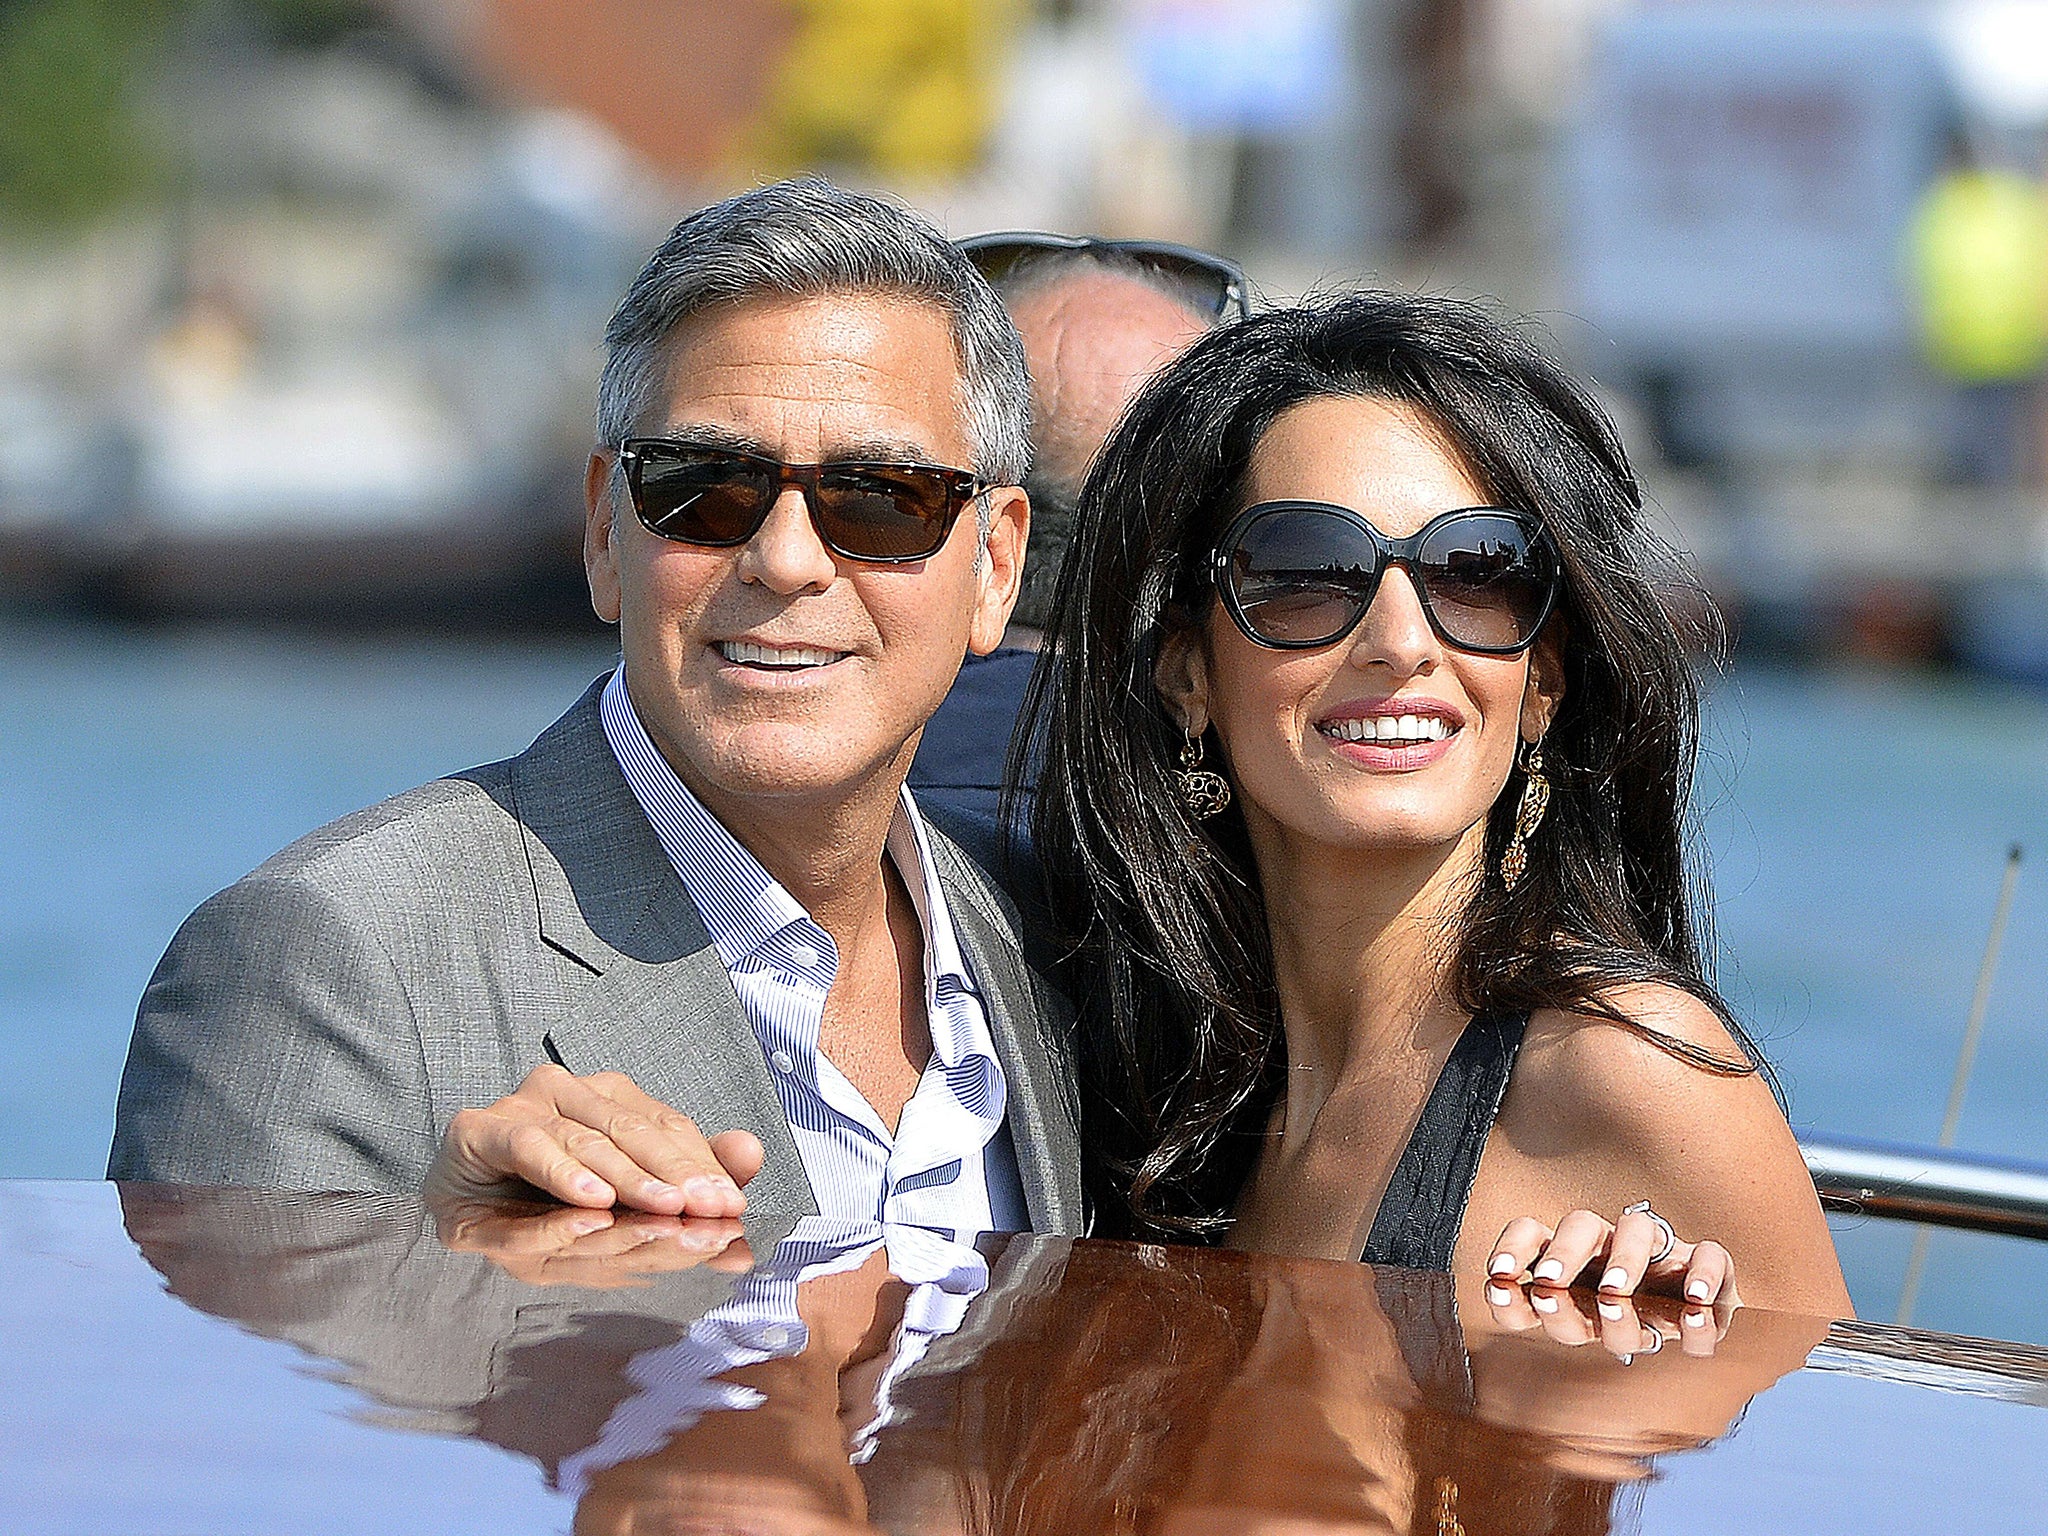 George Clooney and his Lebanon-born British fiancée Amal Alamuddin take a water taxi after arriving in Venice
yesterday